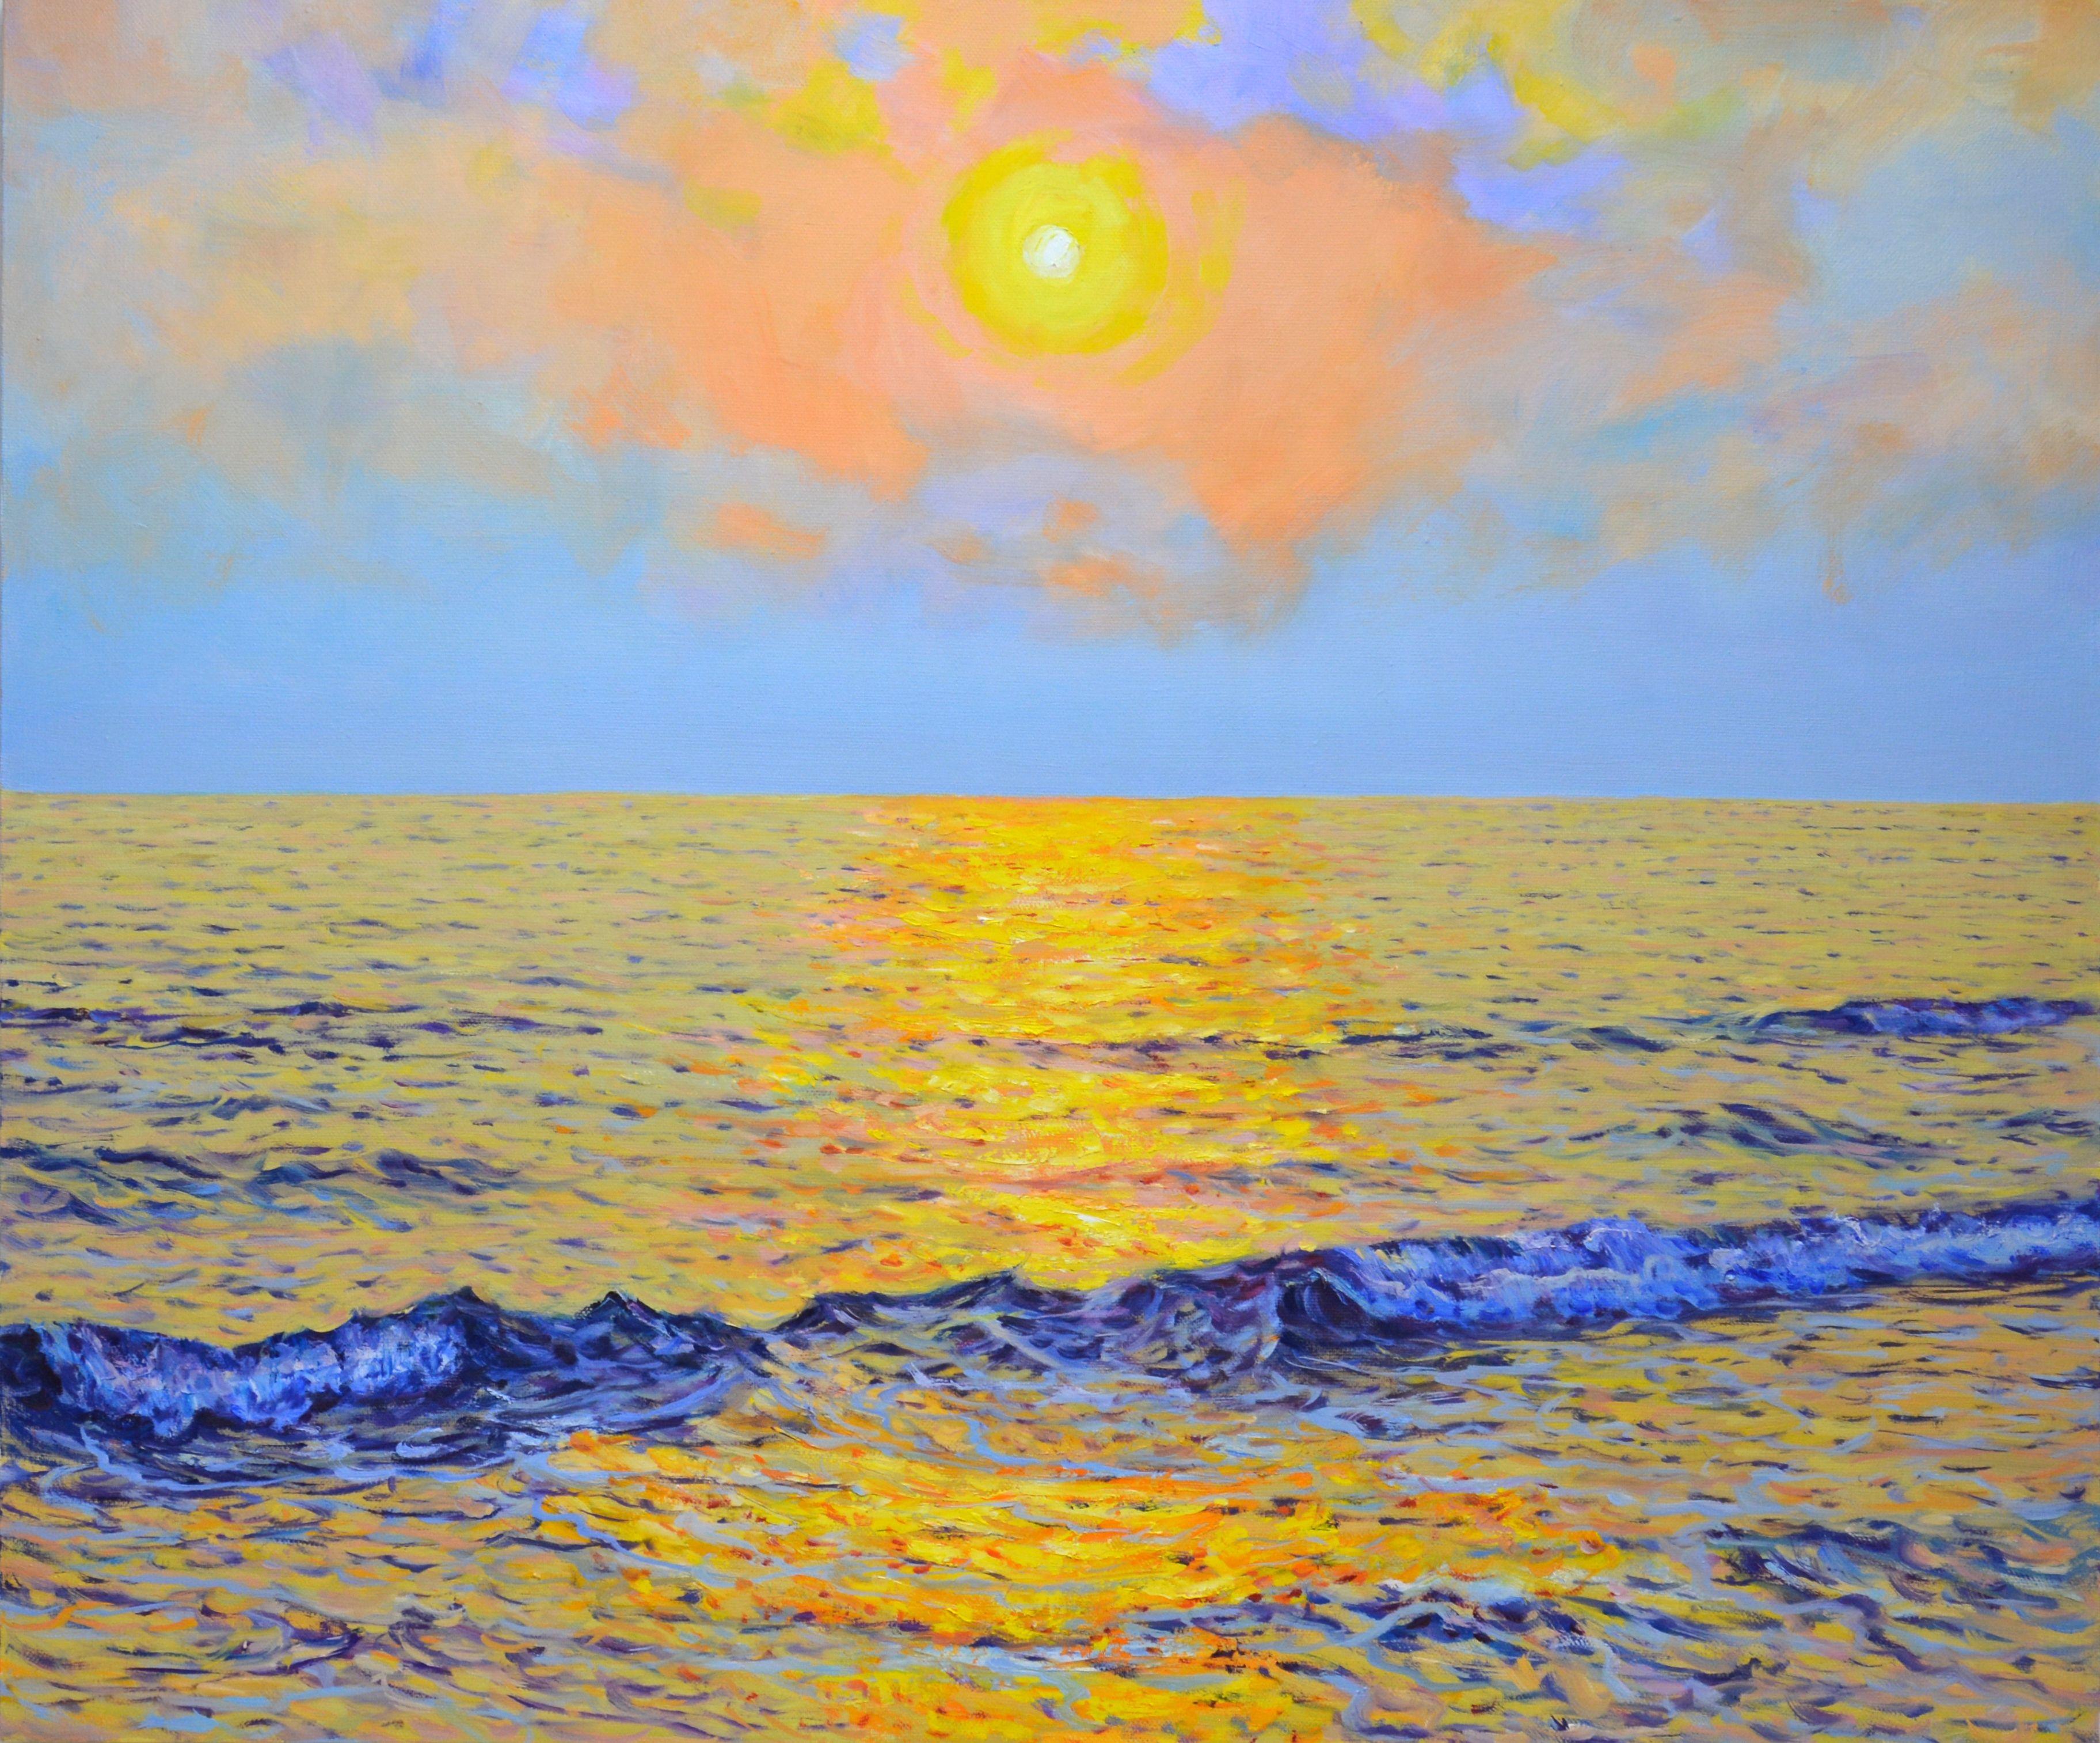 Golden sunset over the ocean. During my travels I study a lot of the sea and the ocean. Then in the workshop I again plunge into a state of admiration for the elements of the sea and the ocean, paint in oil on a large linen canvas. The ocean sunset,